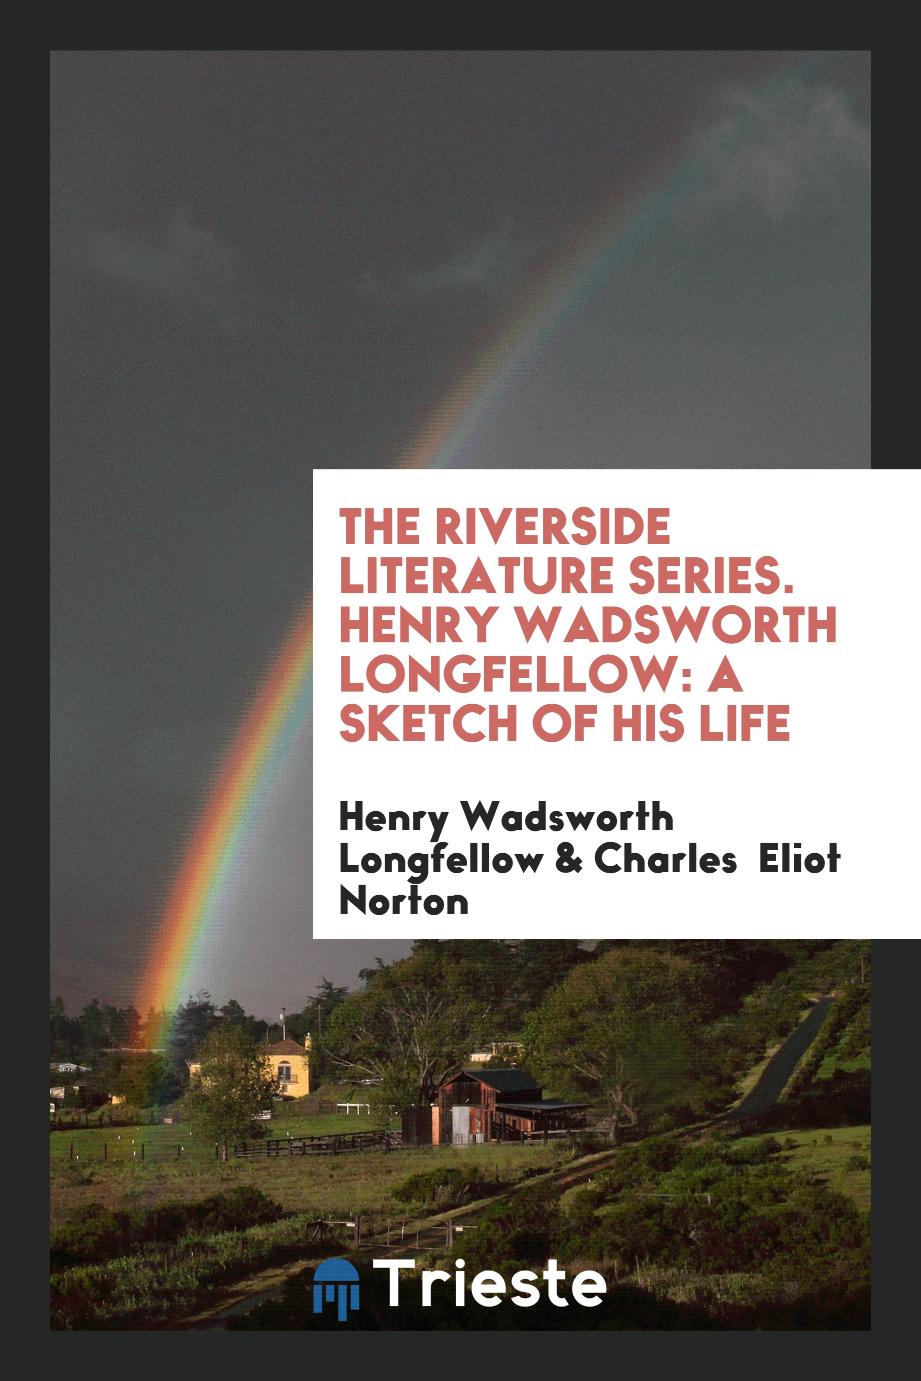 The Riverside Literature Series. Henry Wadsworth Longfellow: A Sketch of His Life